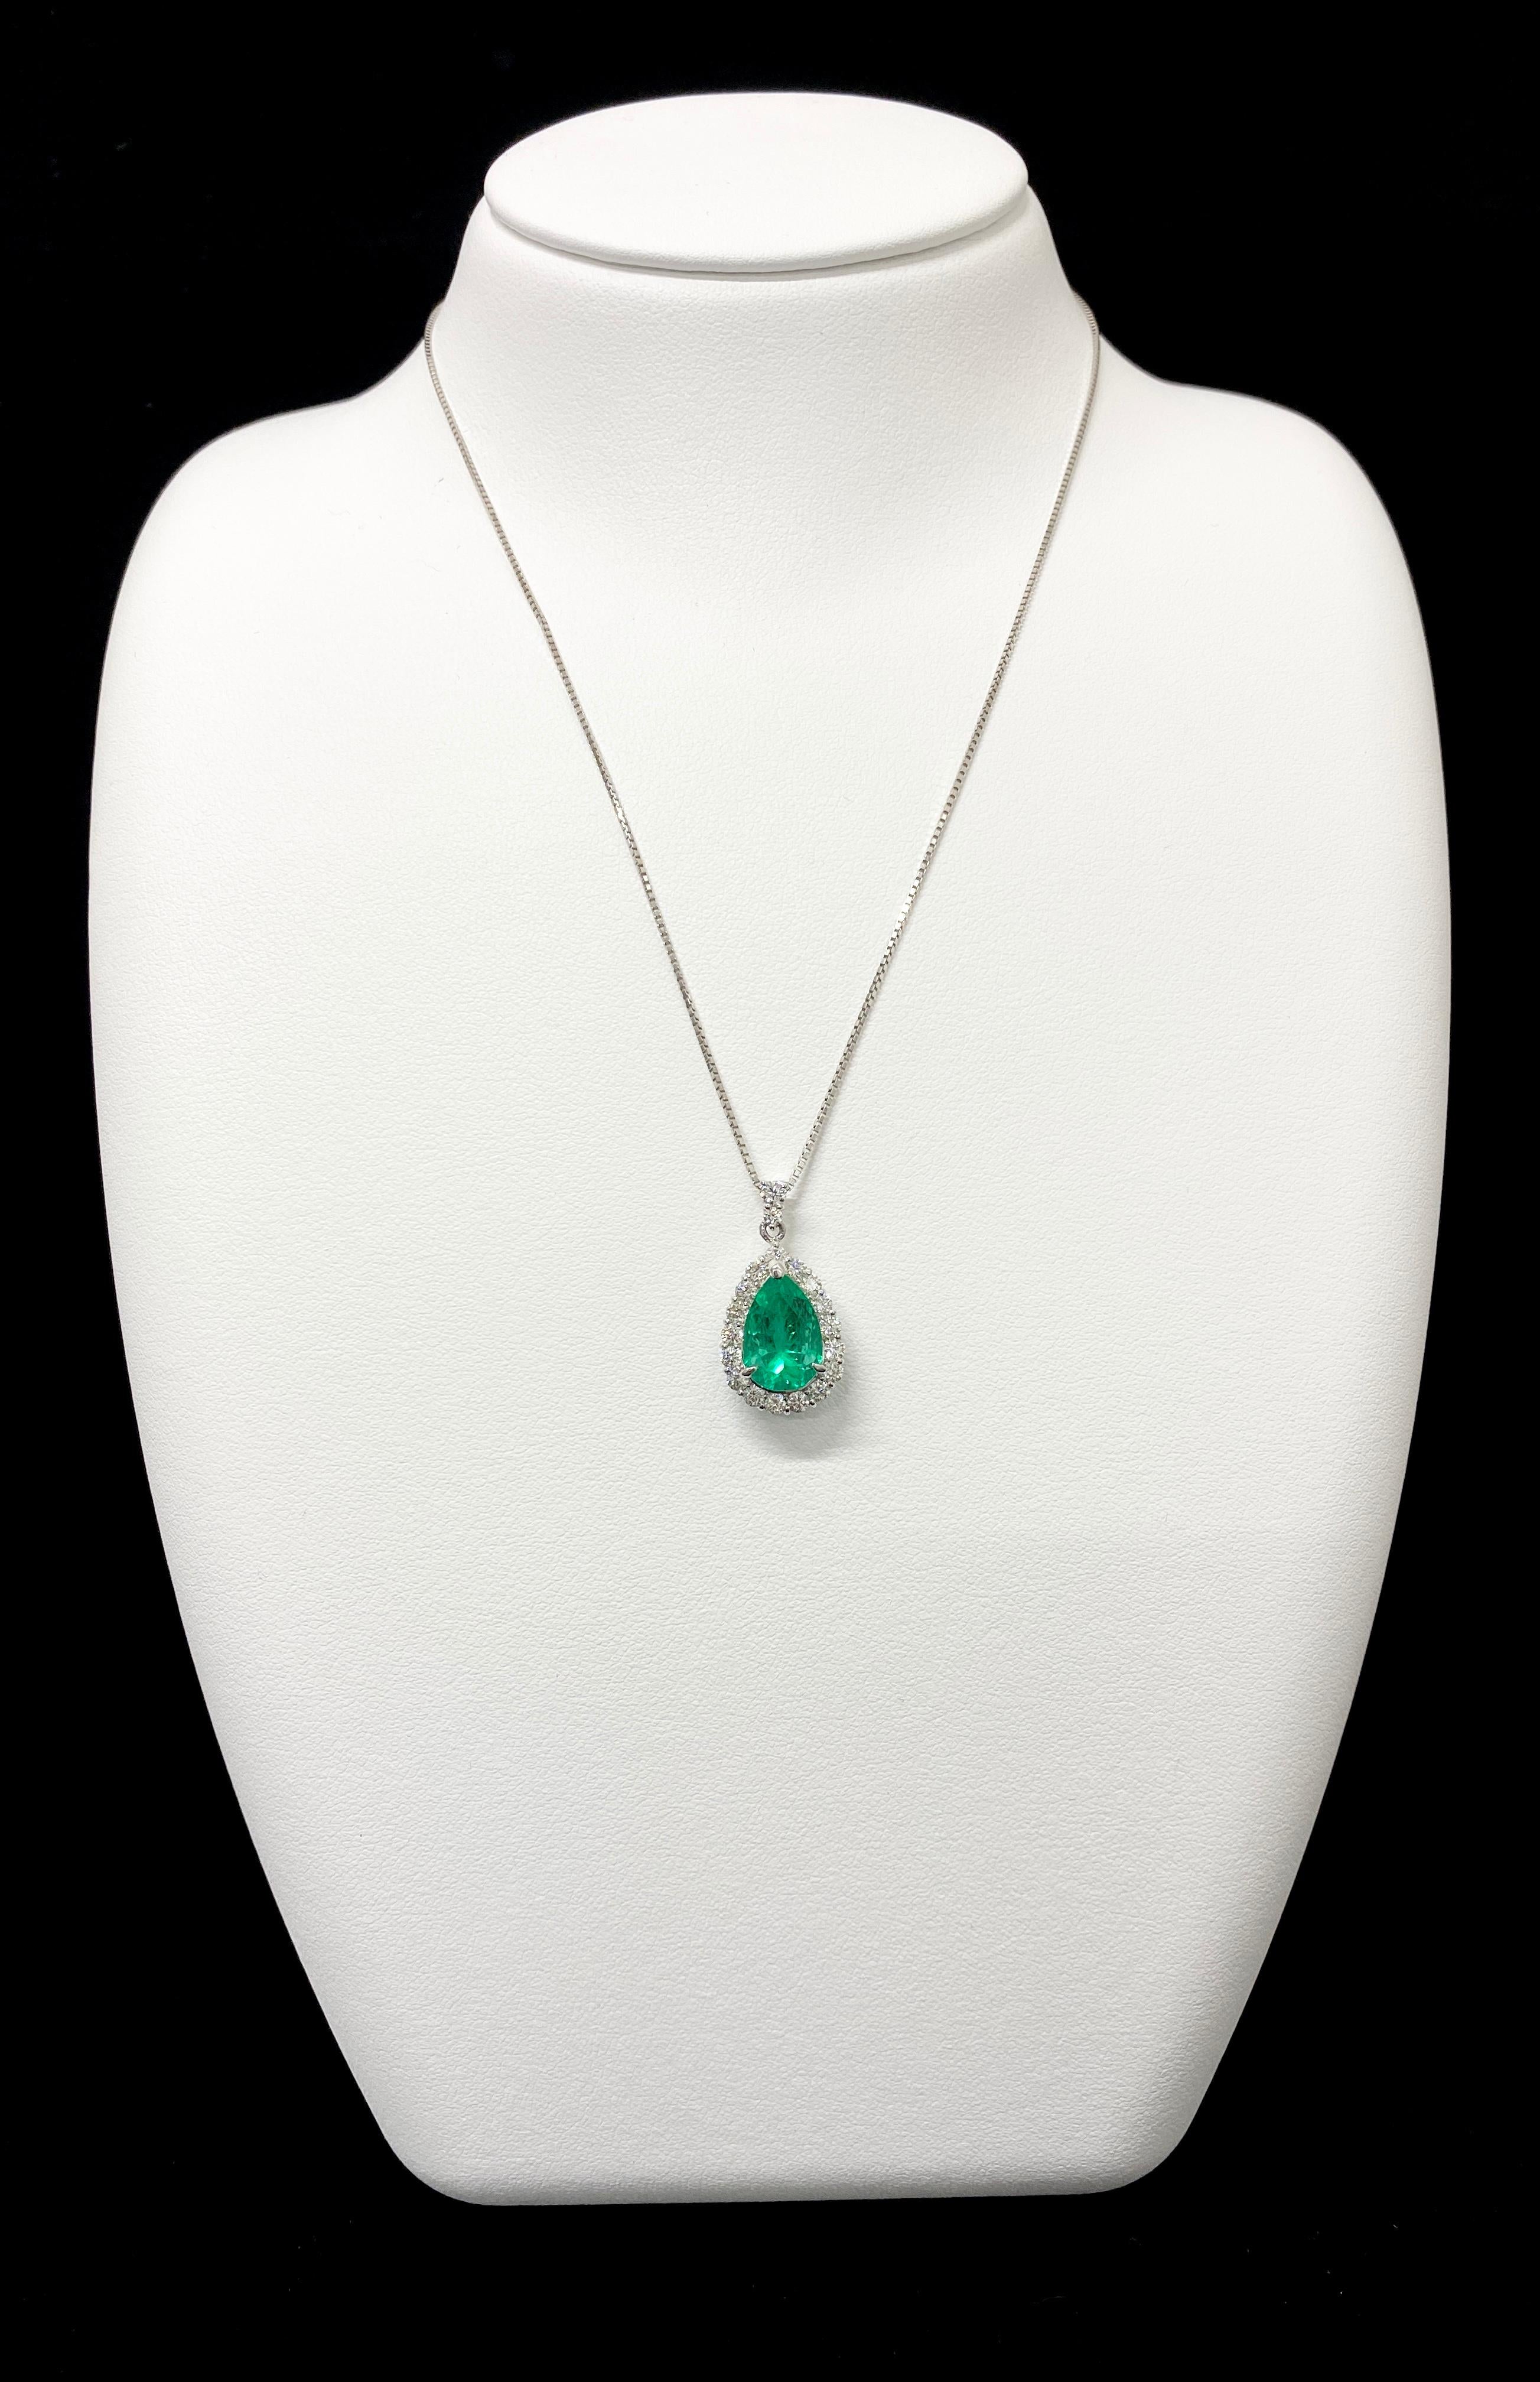 A stunning Pendant featuring a 2.40 Carat, Natural Emerald and 0.68 Carats of Diamond Accents set in Platinum. People have admired emerald’s green for thousands of years. Emeralds have always been associated with the lushest landscapes and the